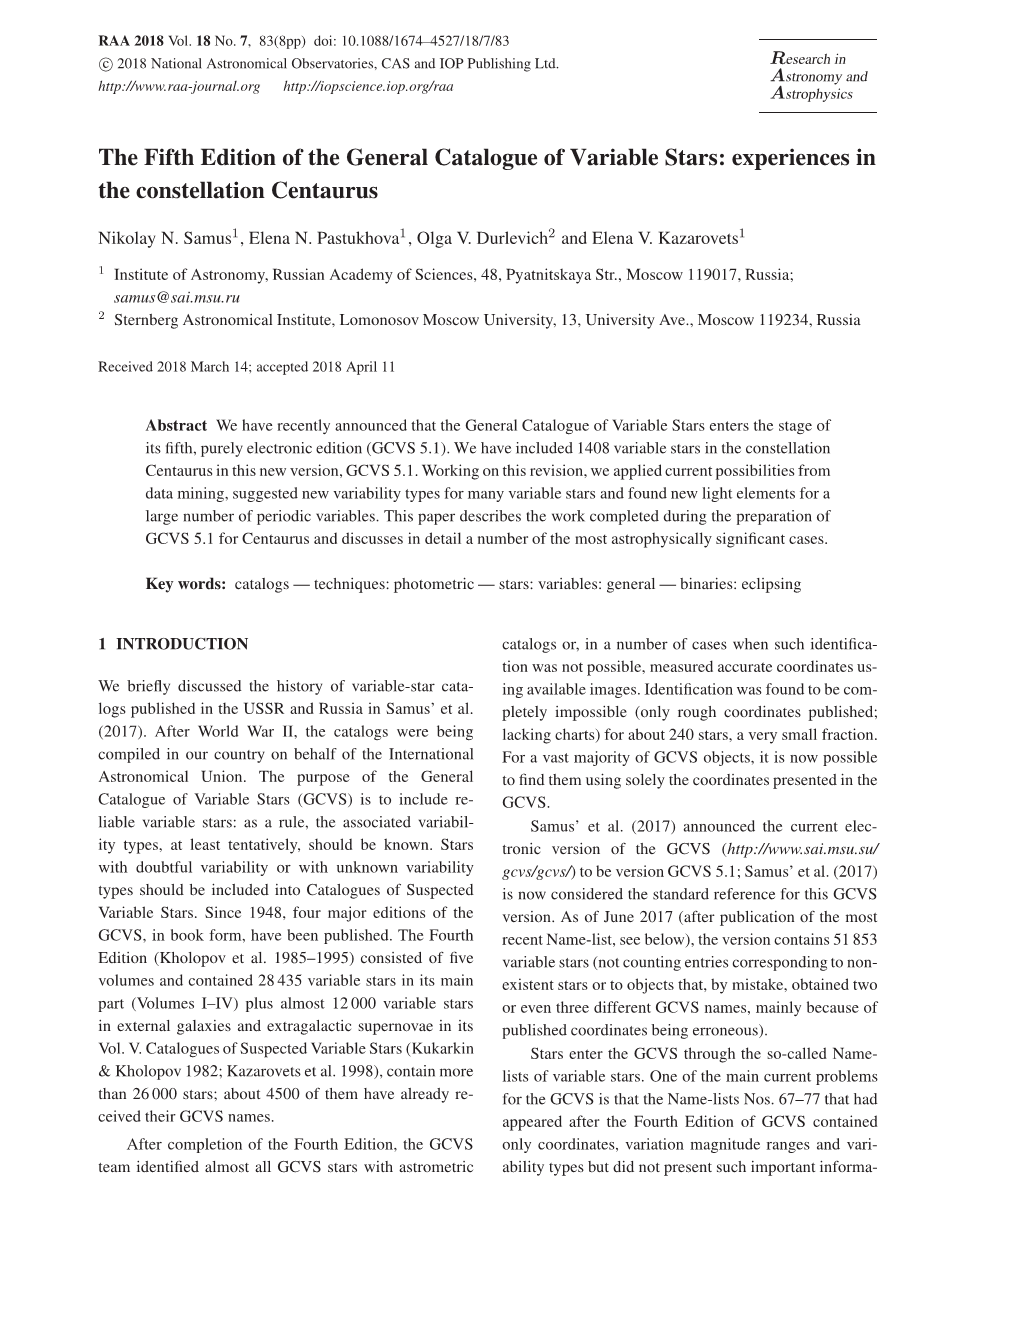 The Fifth Edition of the General Catalogue of Variable Stars: Experiences in the Constellation Centaurus